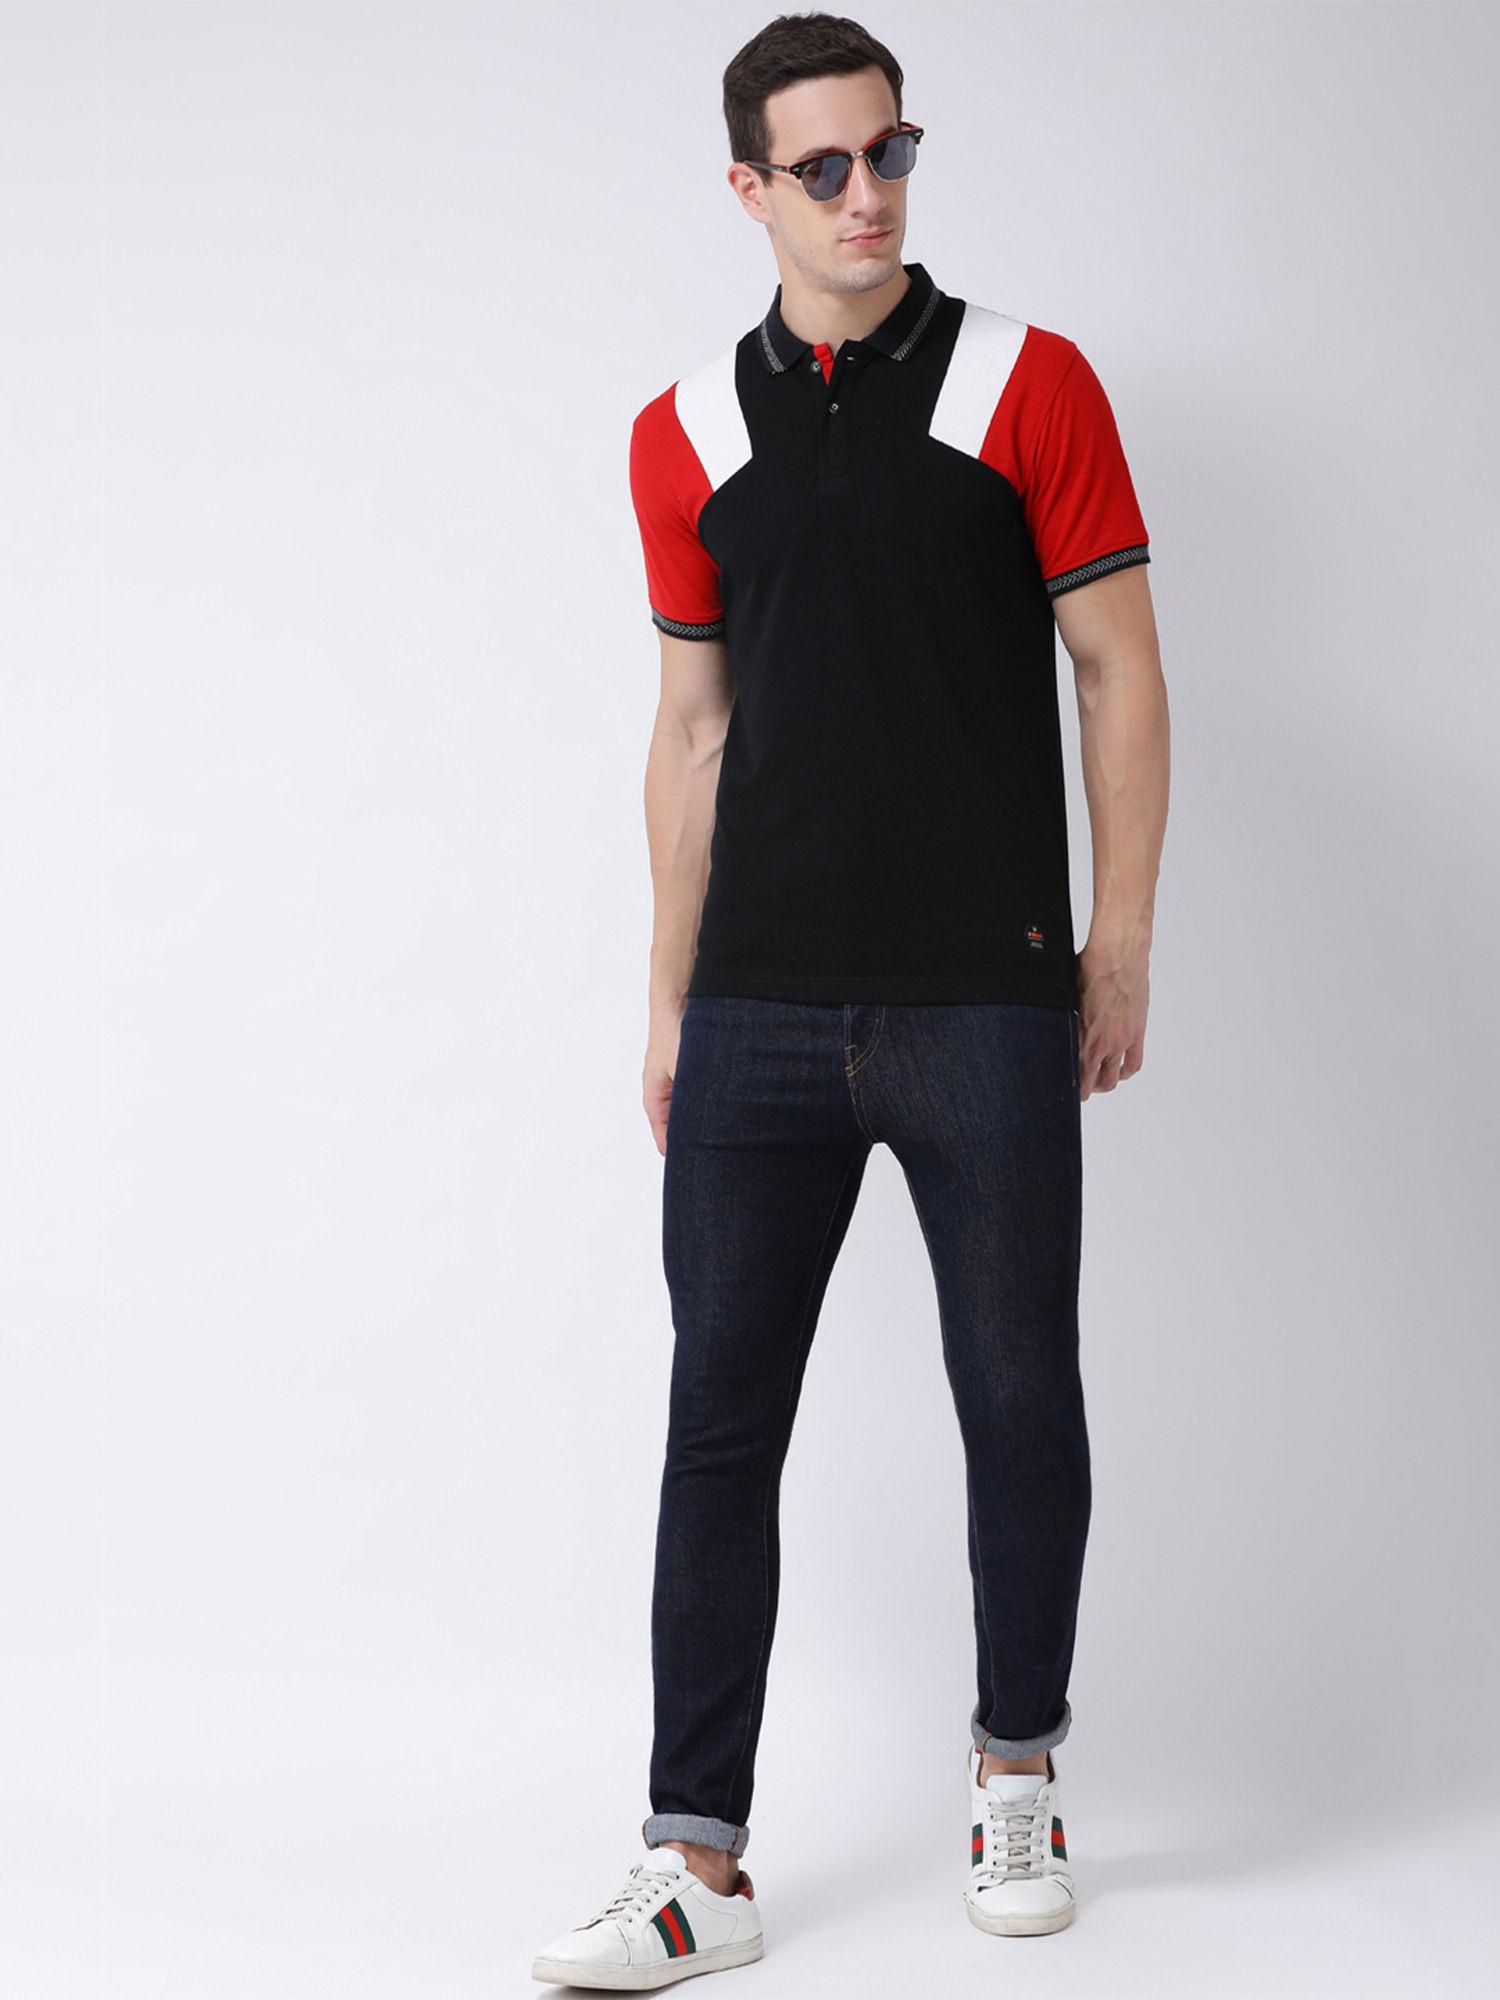 men's black cut and sew half sleeve polo neck t-shirt